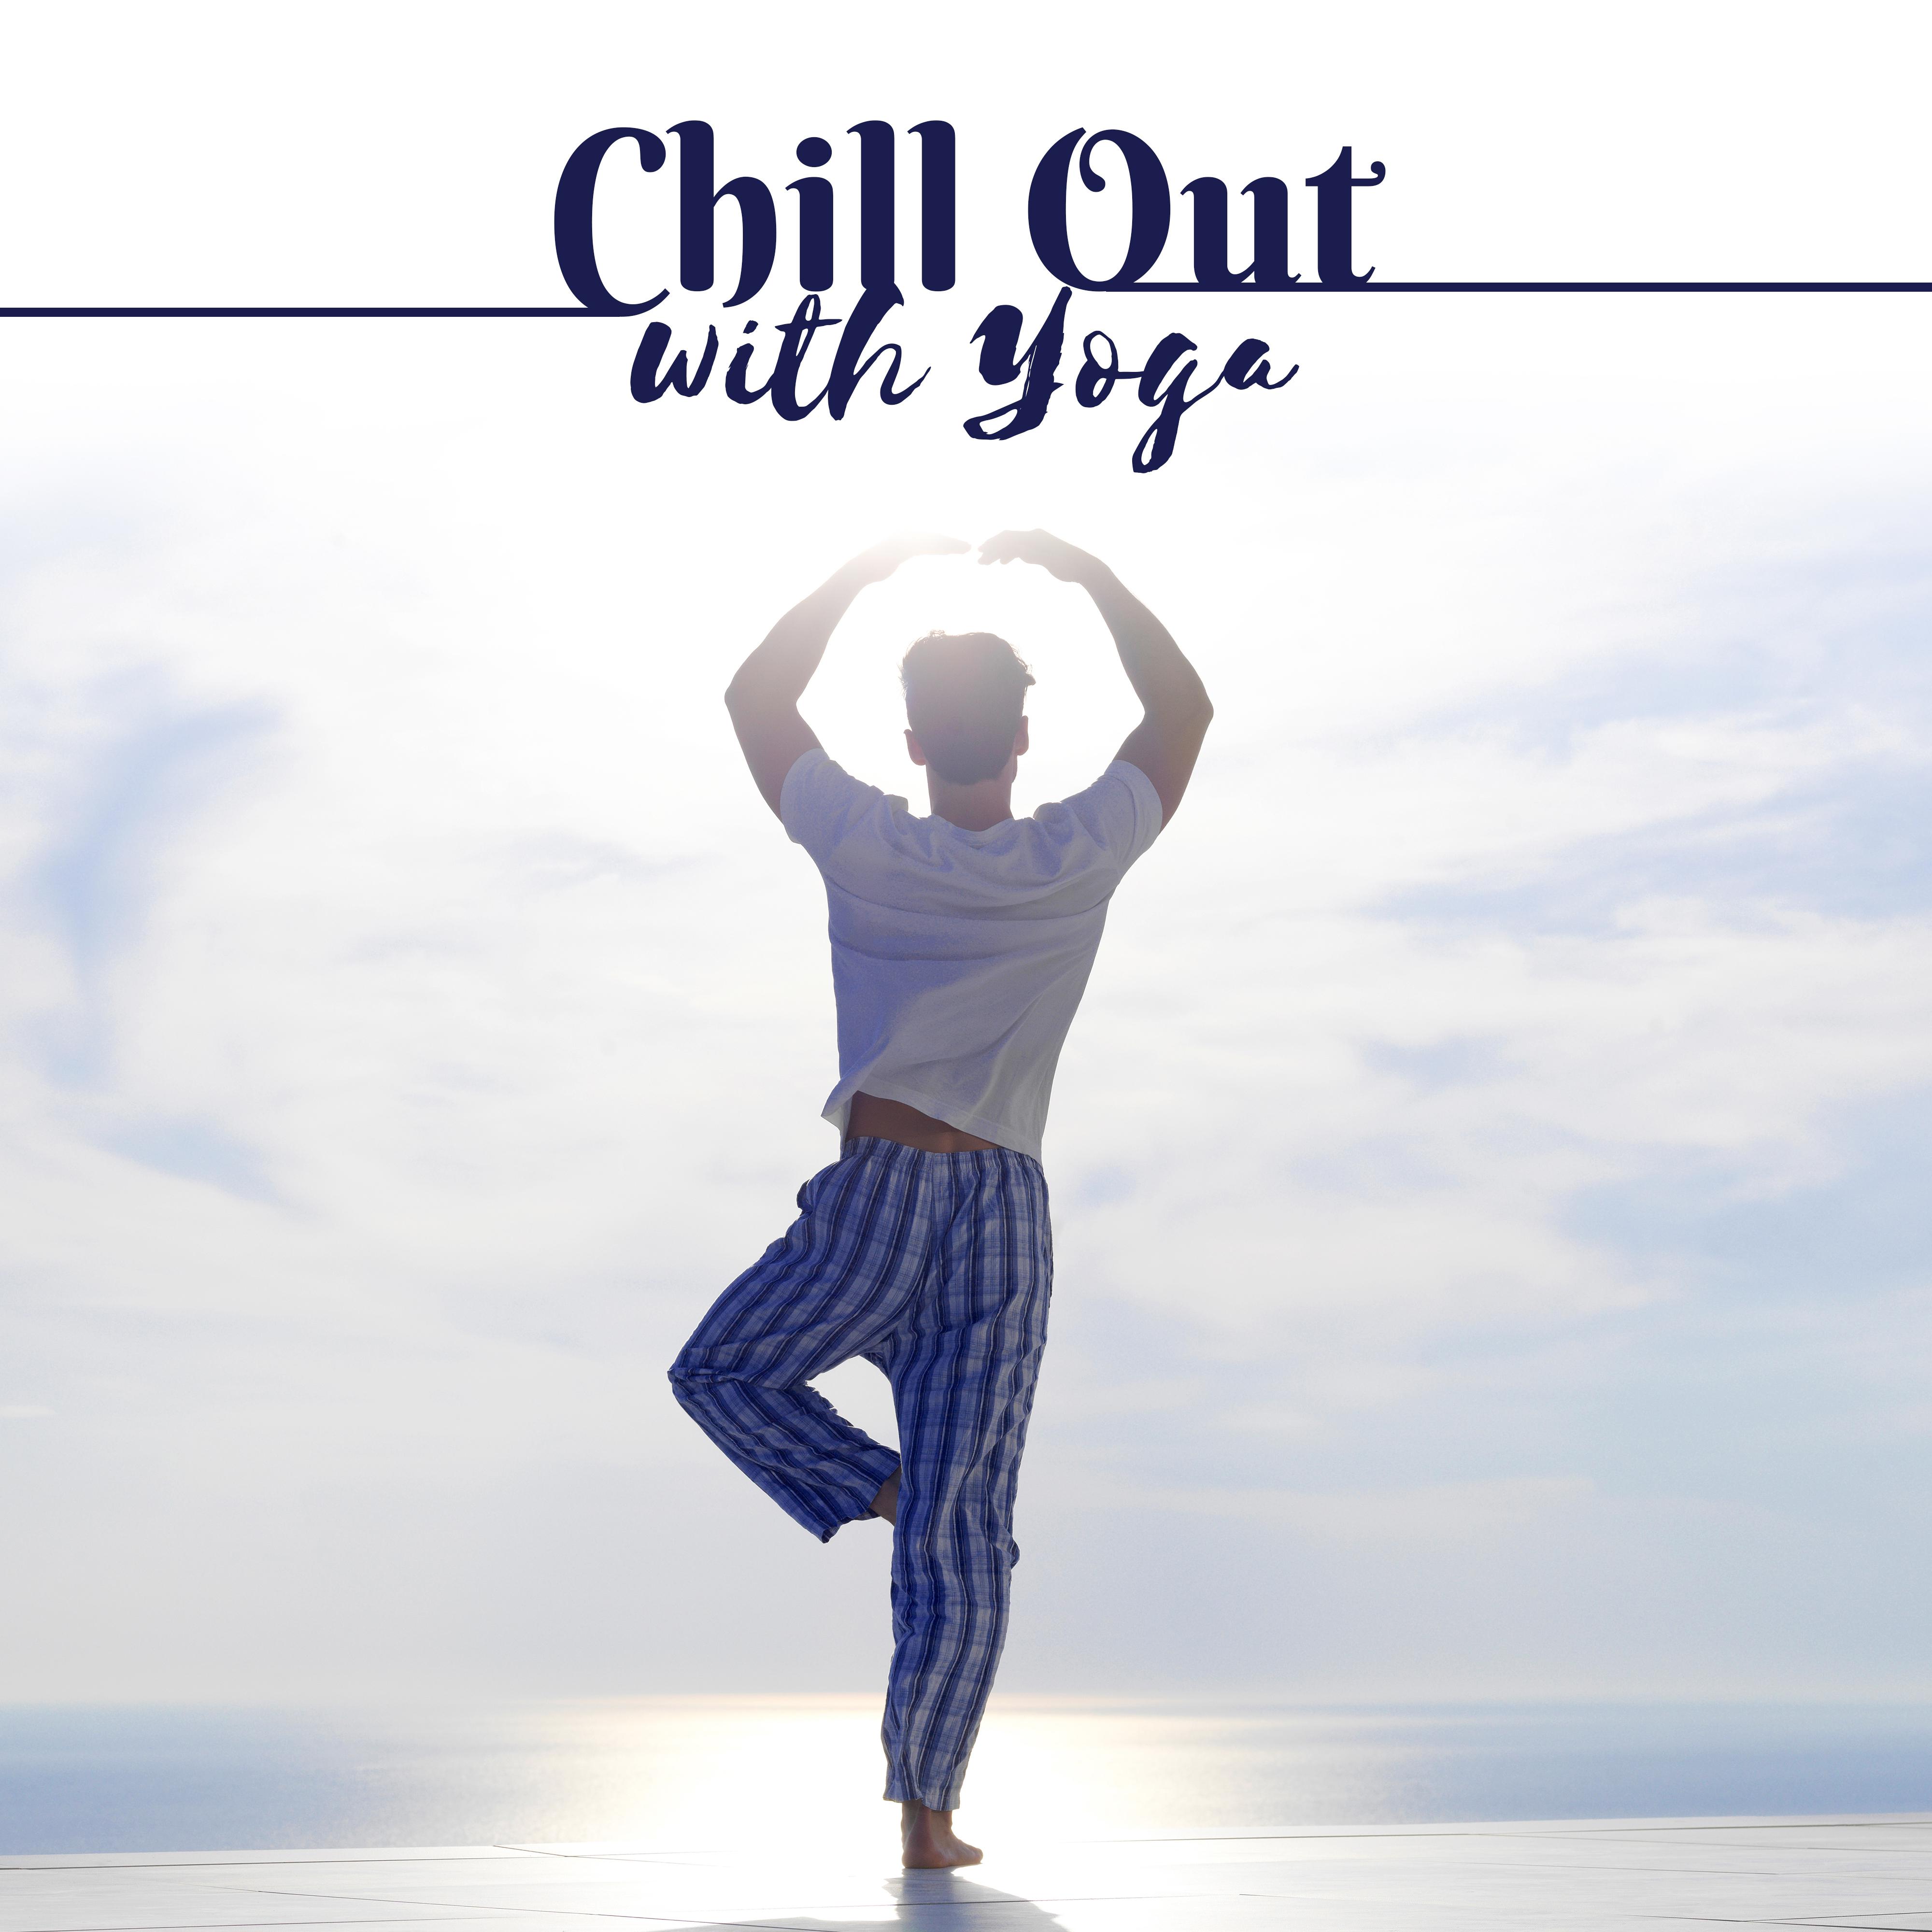 Chill Out with Yoga – Pure Relaxation, Tibetan Music, Deep Relief, Buddha Lounge, Chill Out 2017